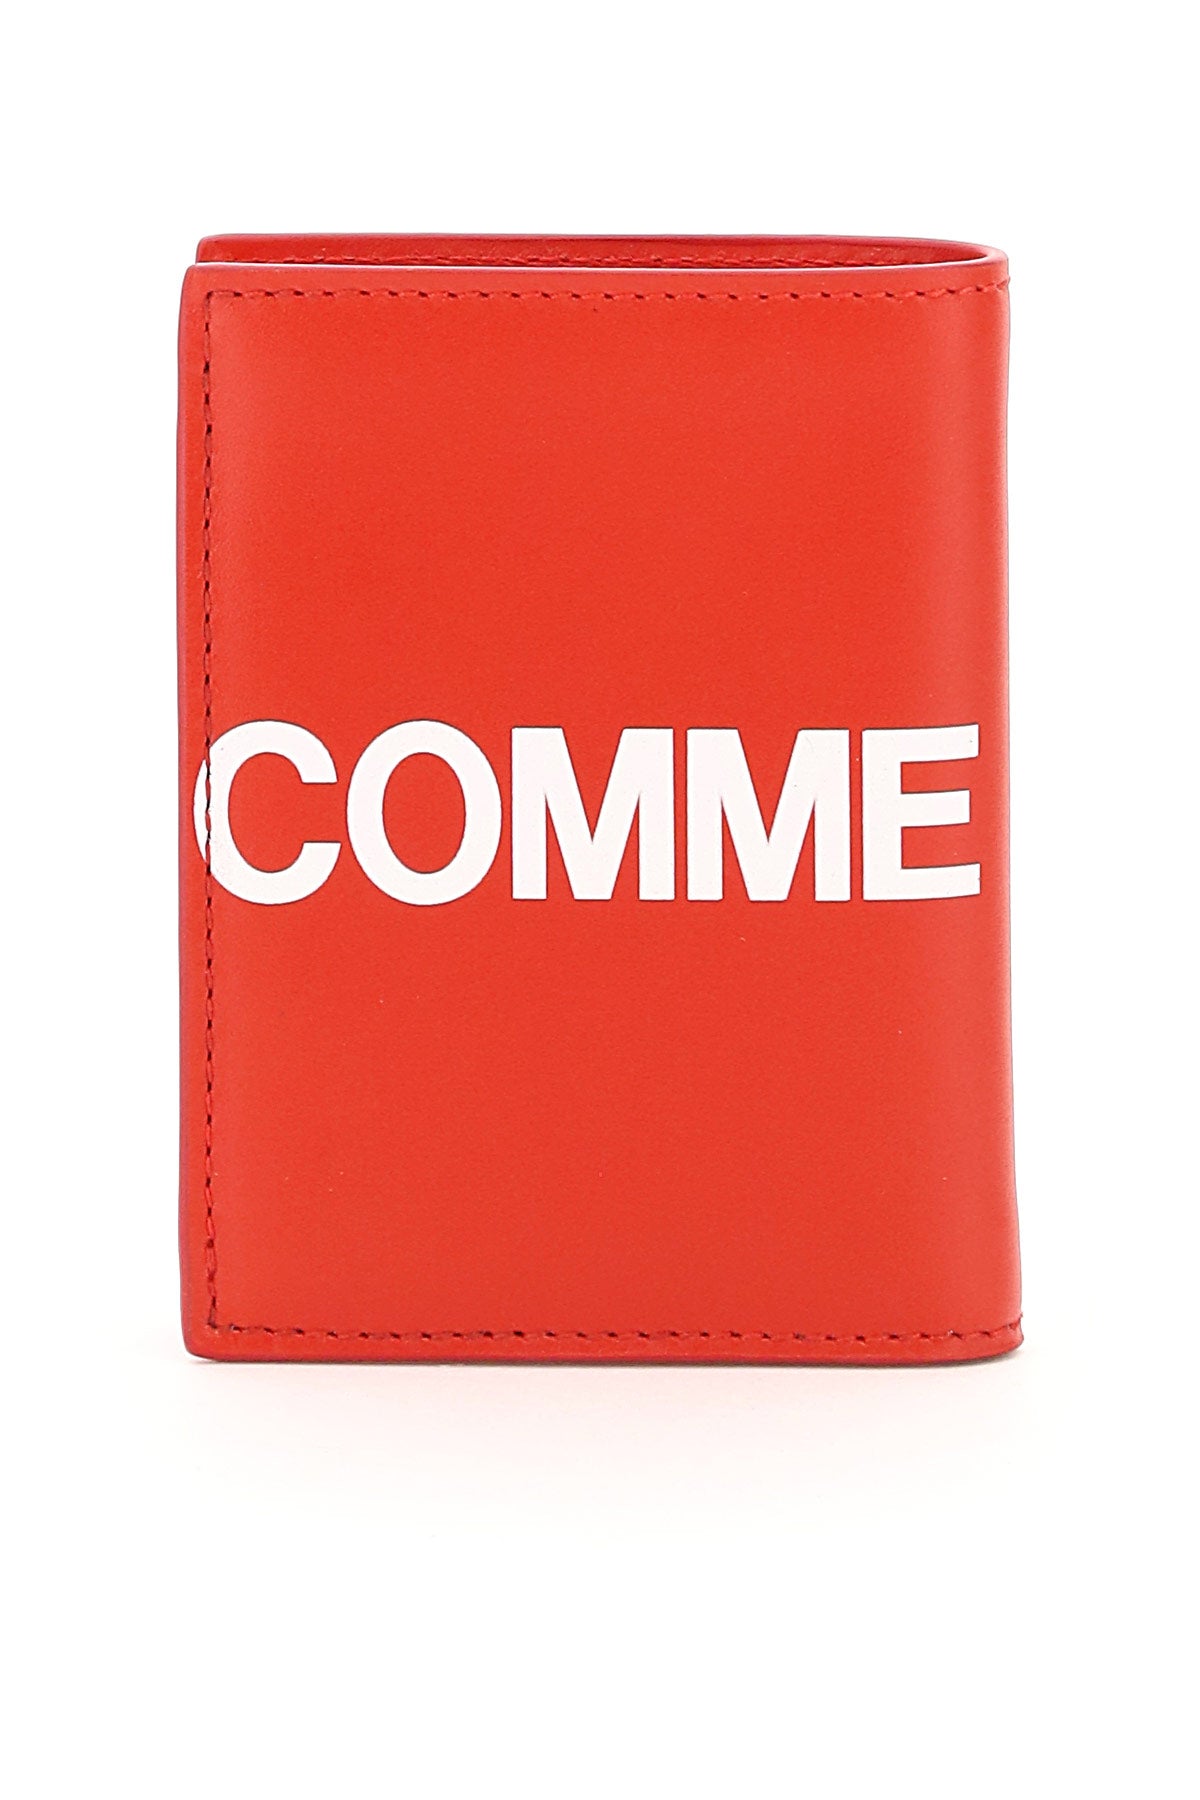 Comme Des Garcons Wallet Comme des garcons wallet small bifold wallet with huge logo